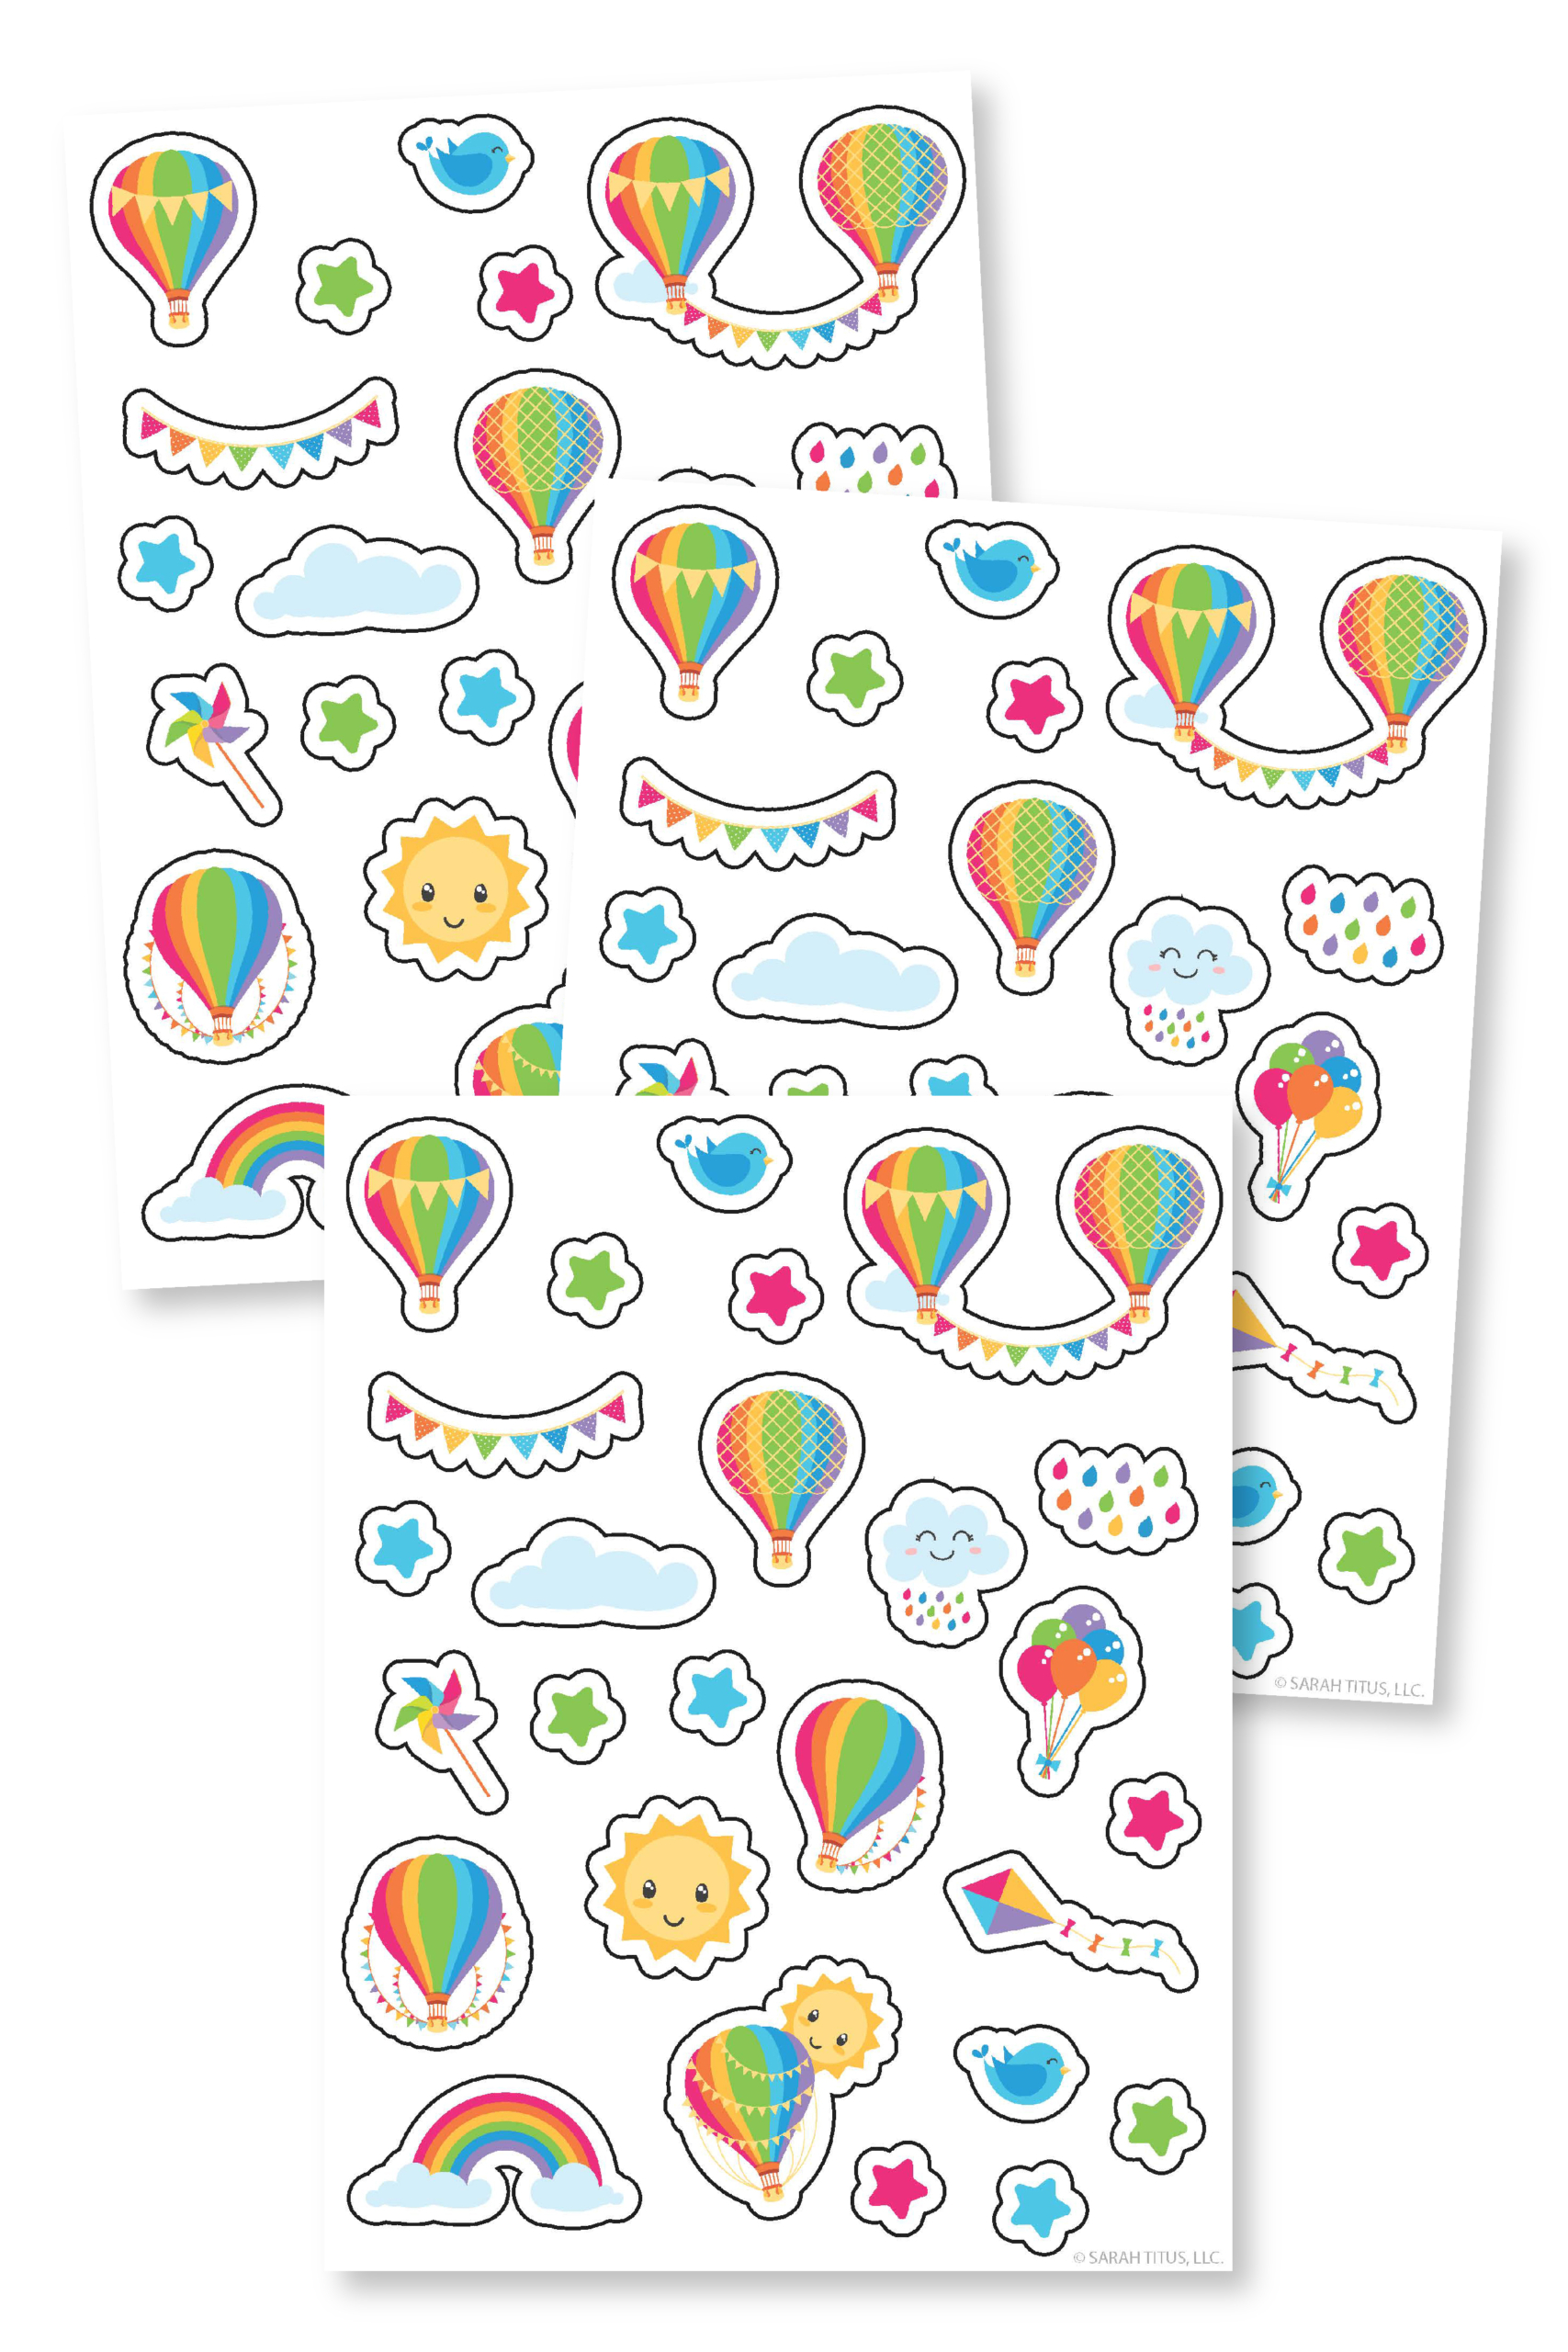 Balloon Stickers - Free holidays Stickers